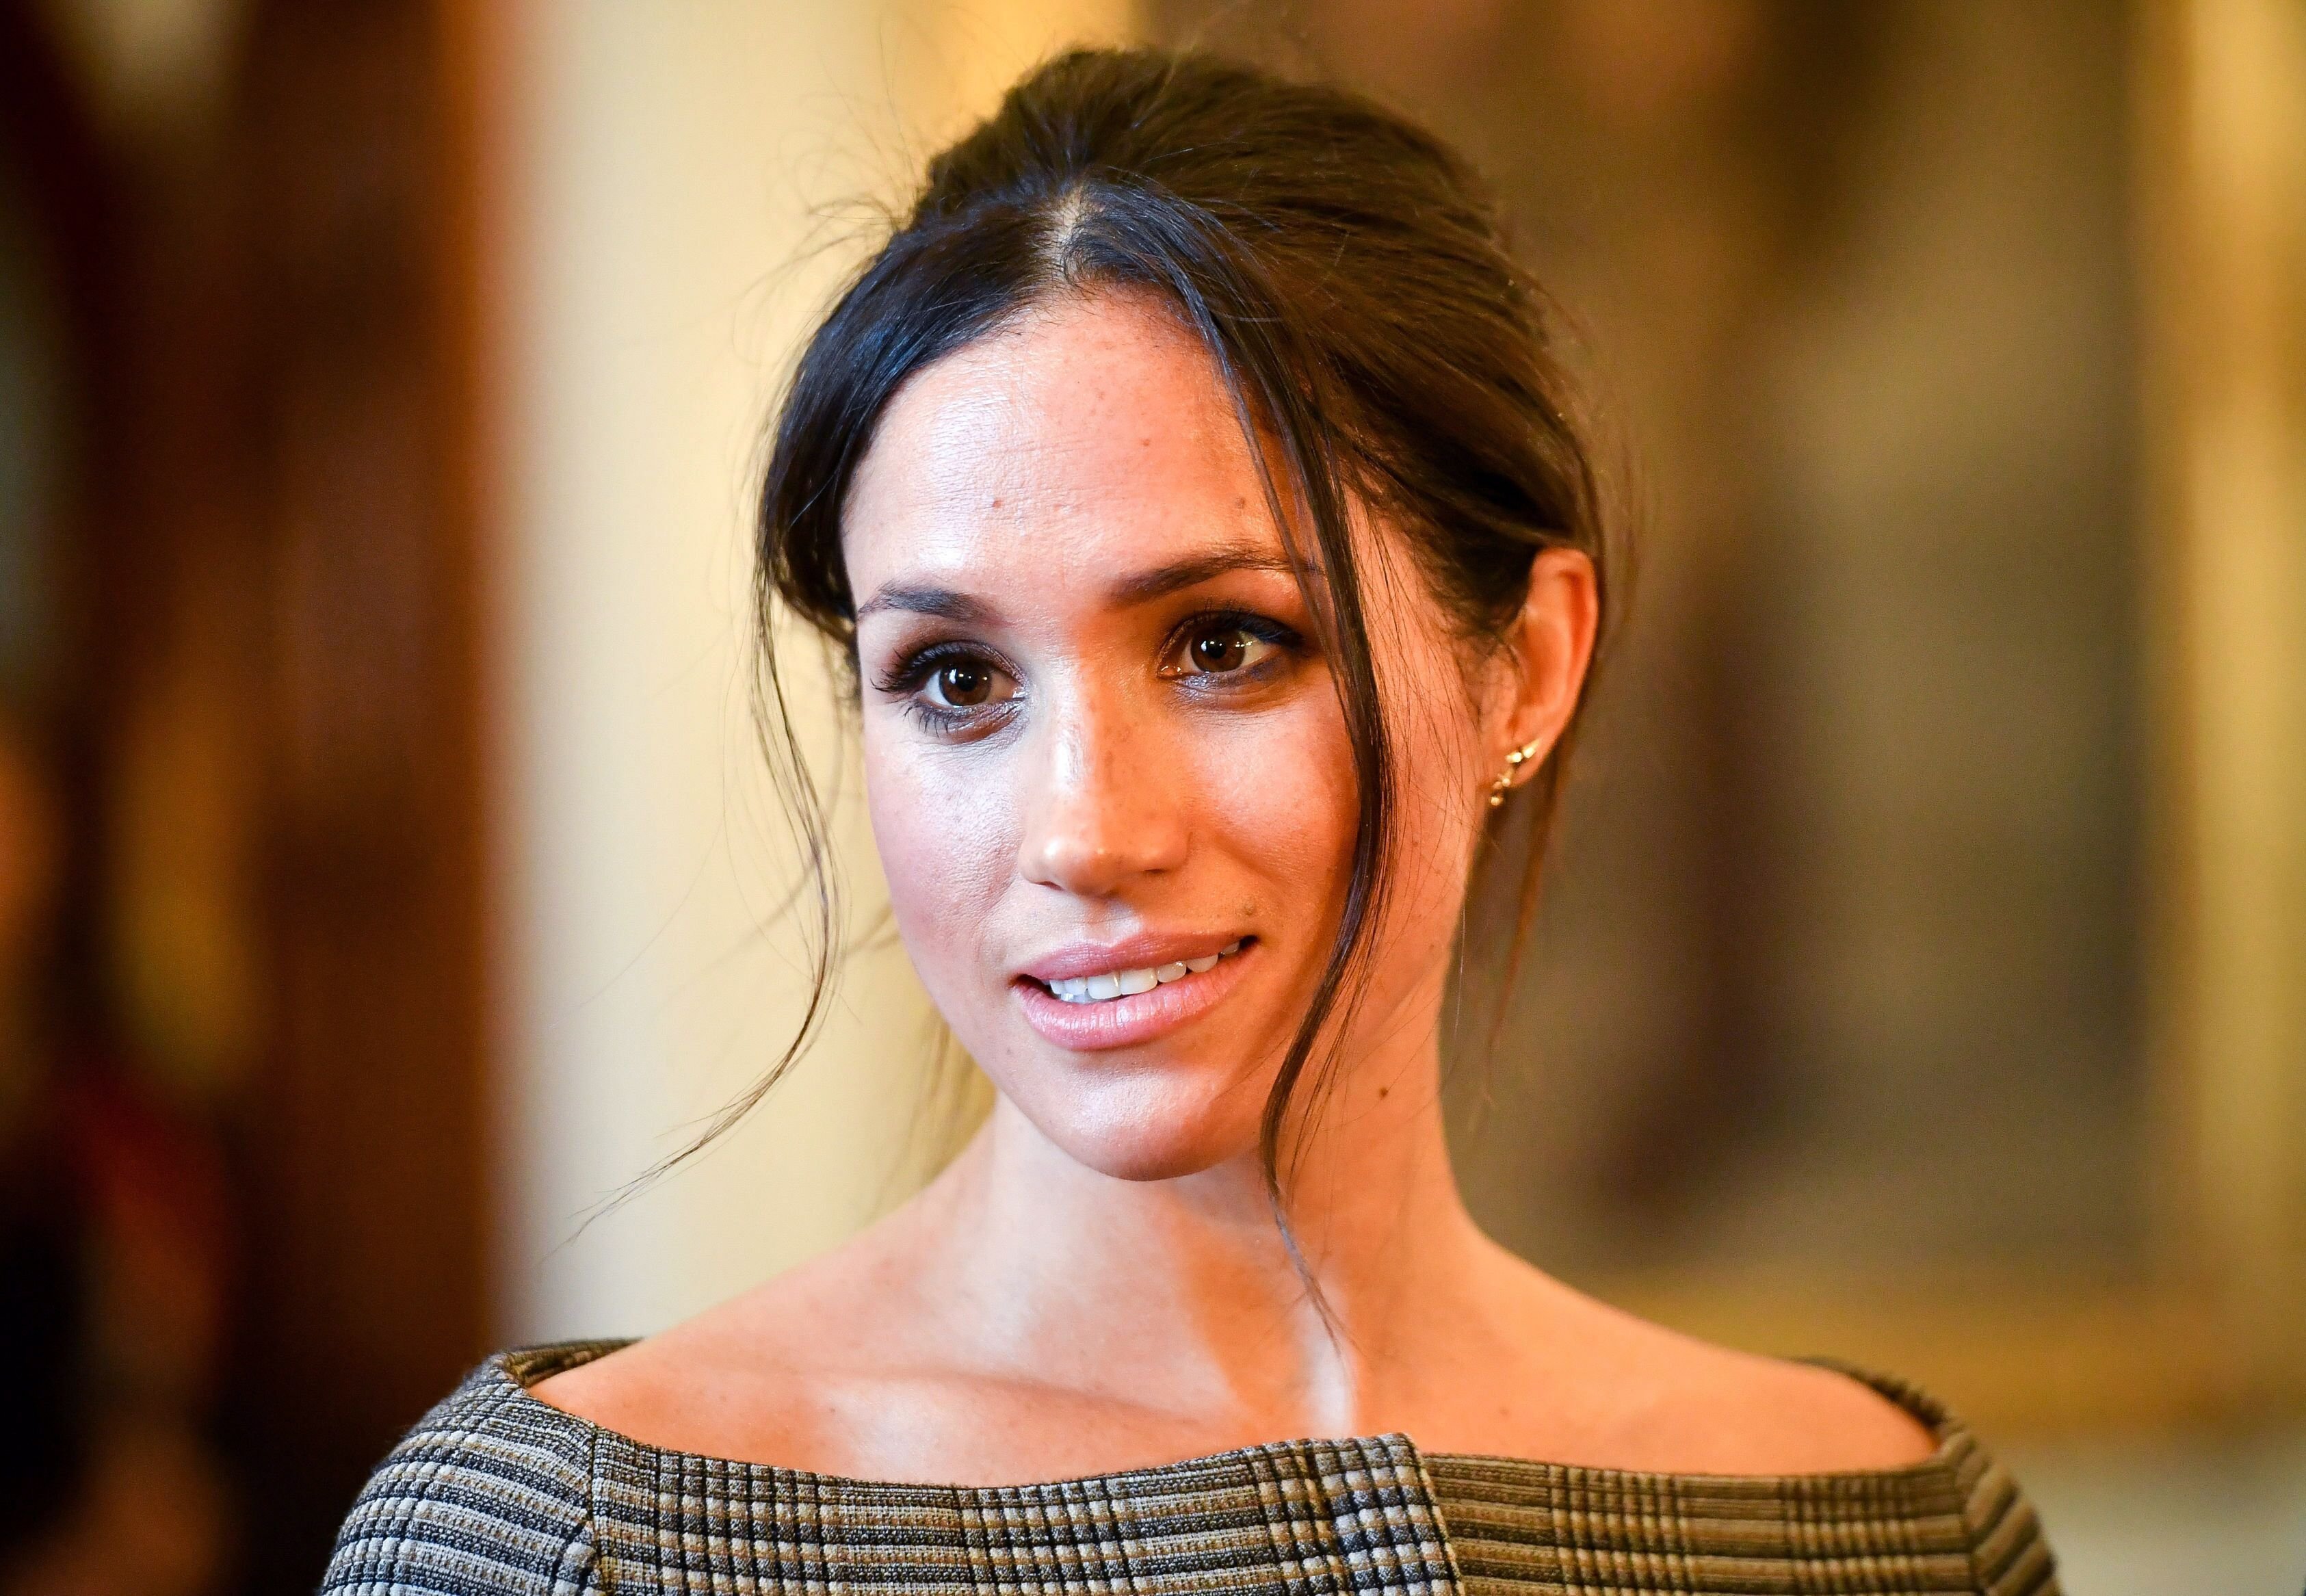 The Duchess of Sussex, former actress Meghan Markle/ Source Getty